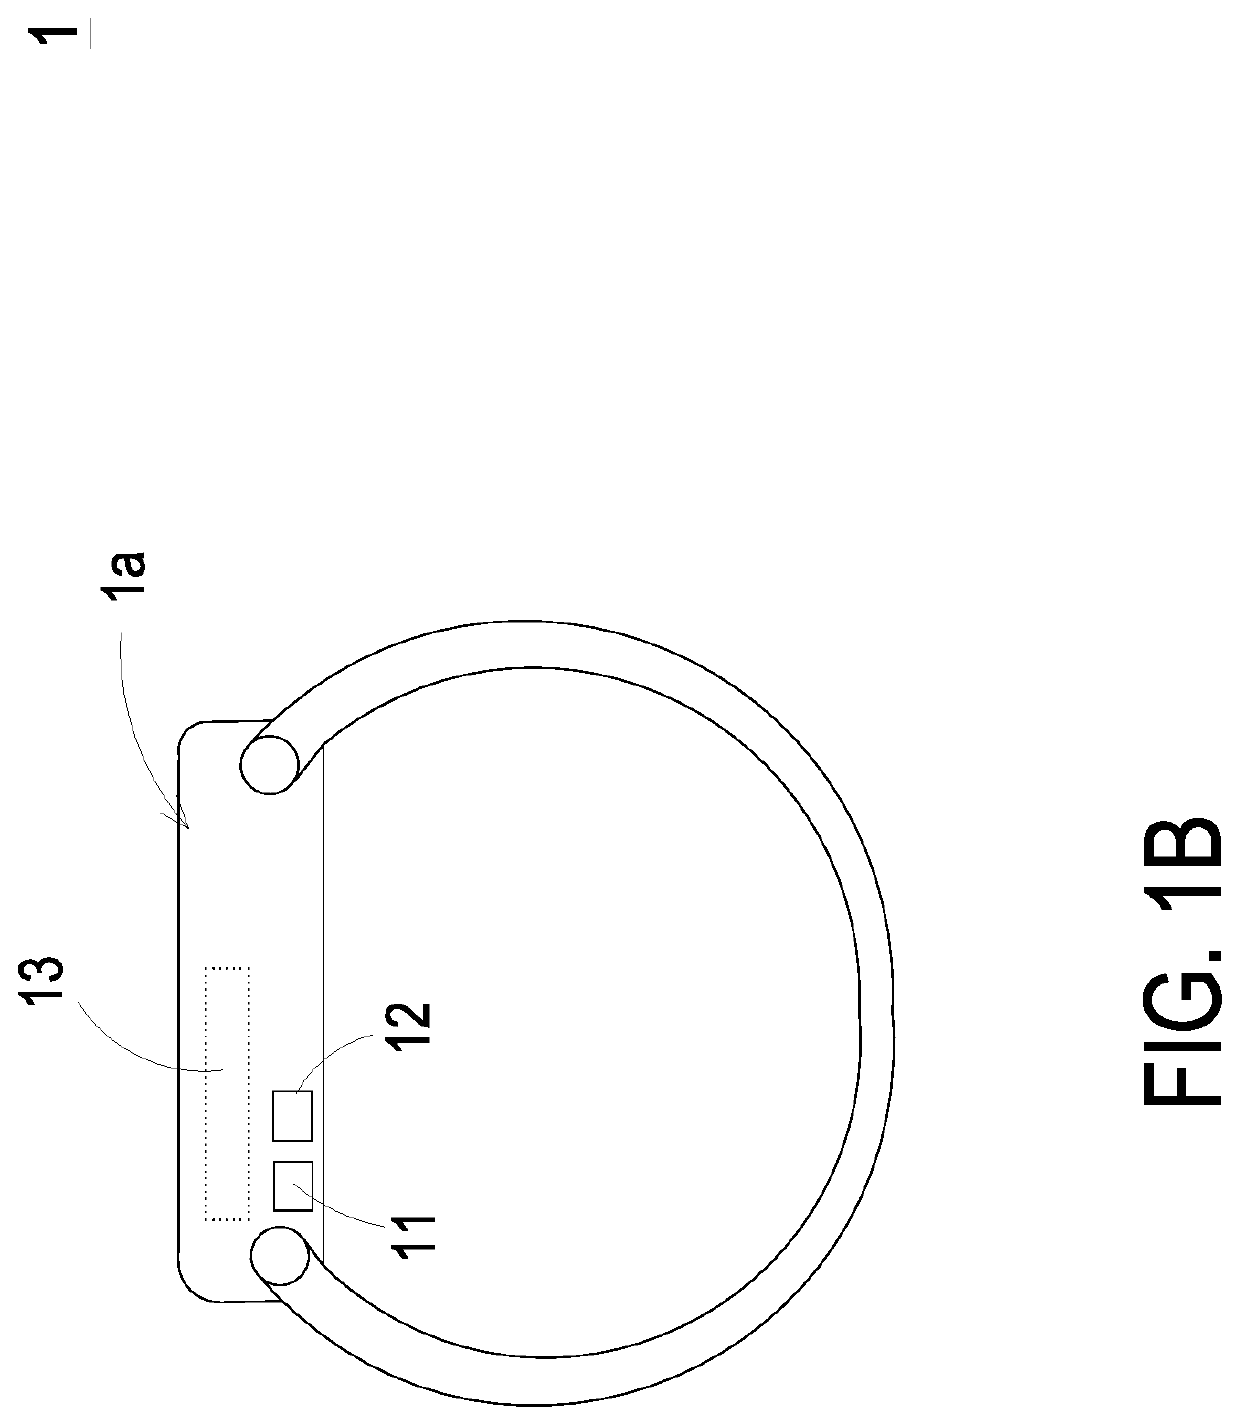 Method of preventing and handling indoor air pollution